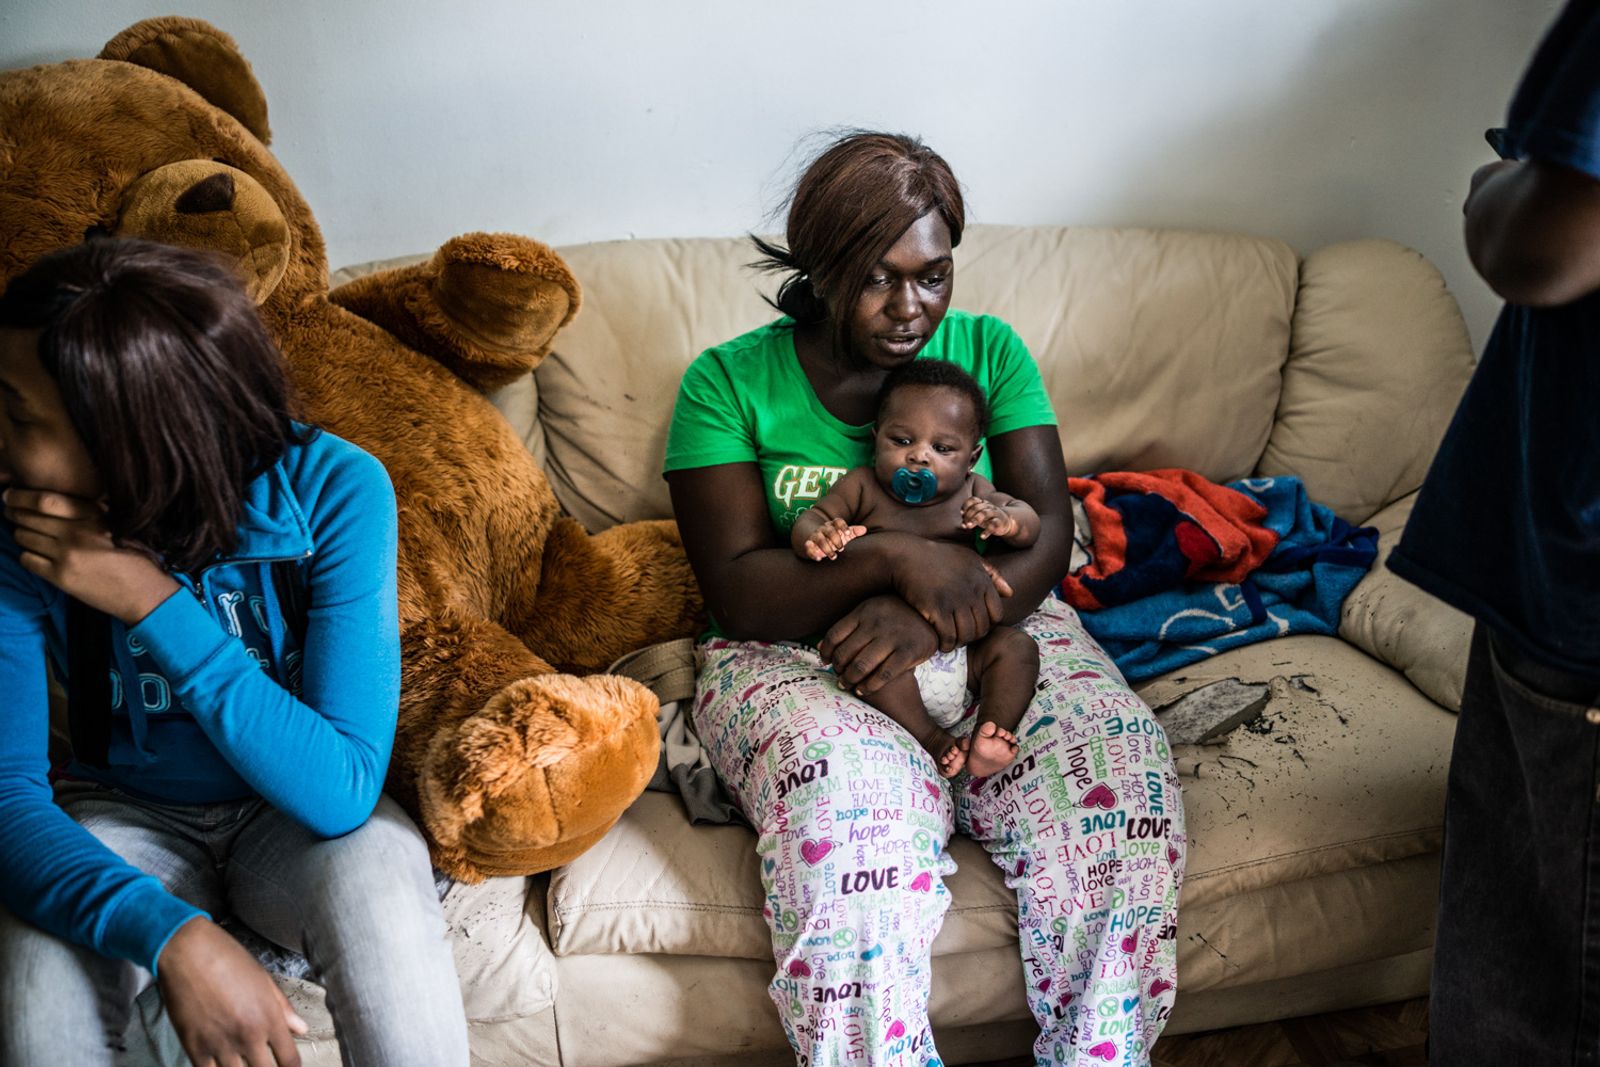 © Zackary Canepari - Brianna Shields, 17, and her baby "Fatdaddy" at the apartment they share with her mother and brother.